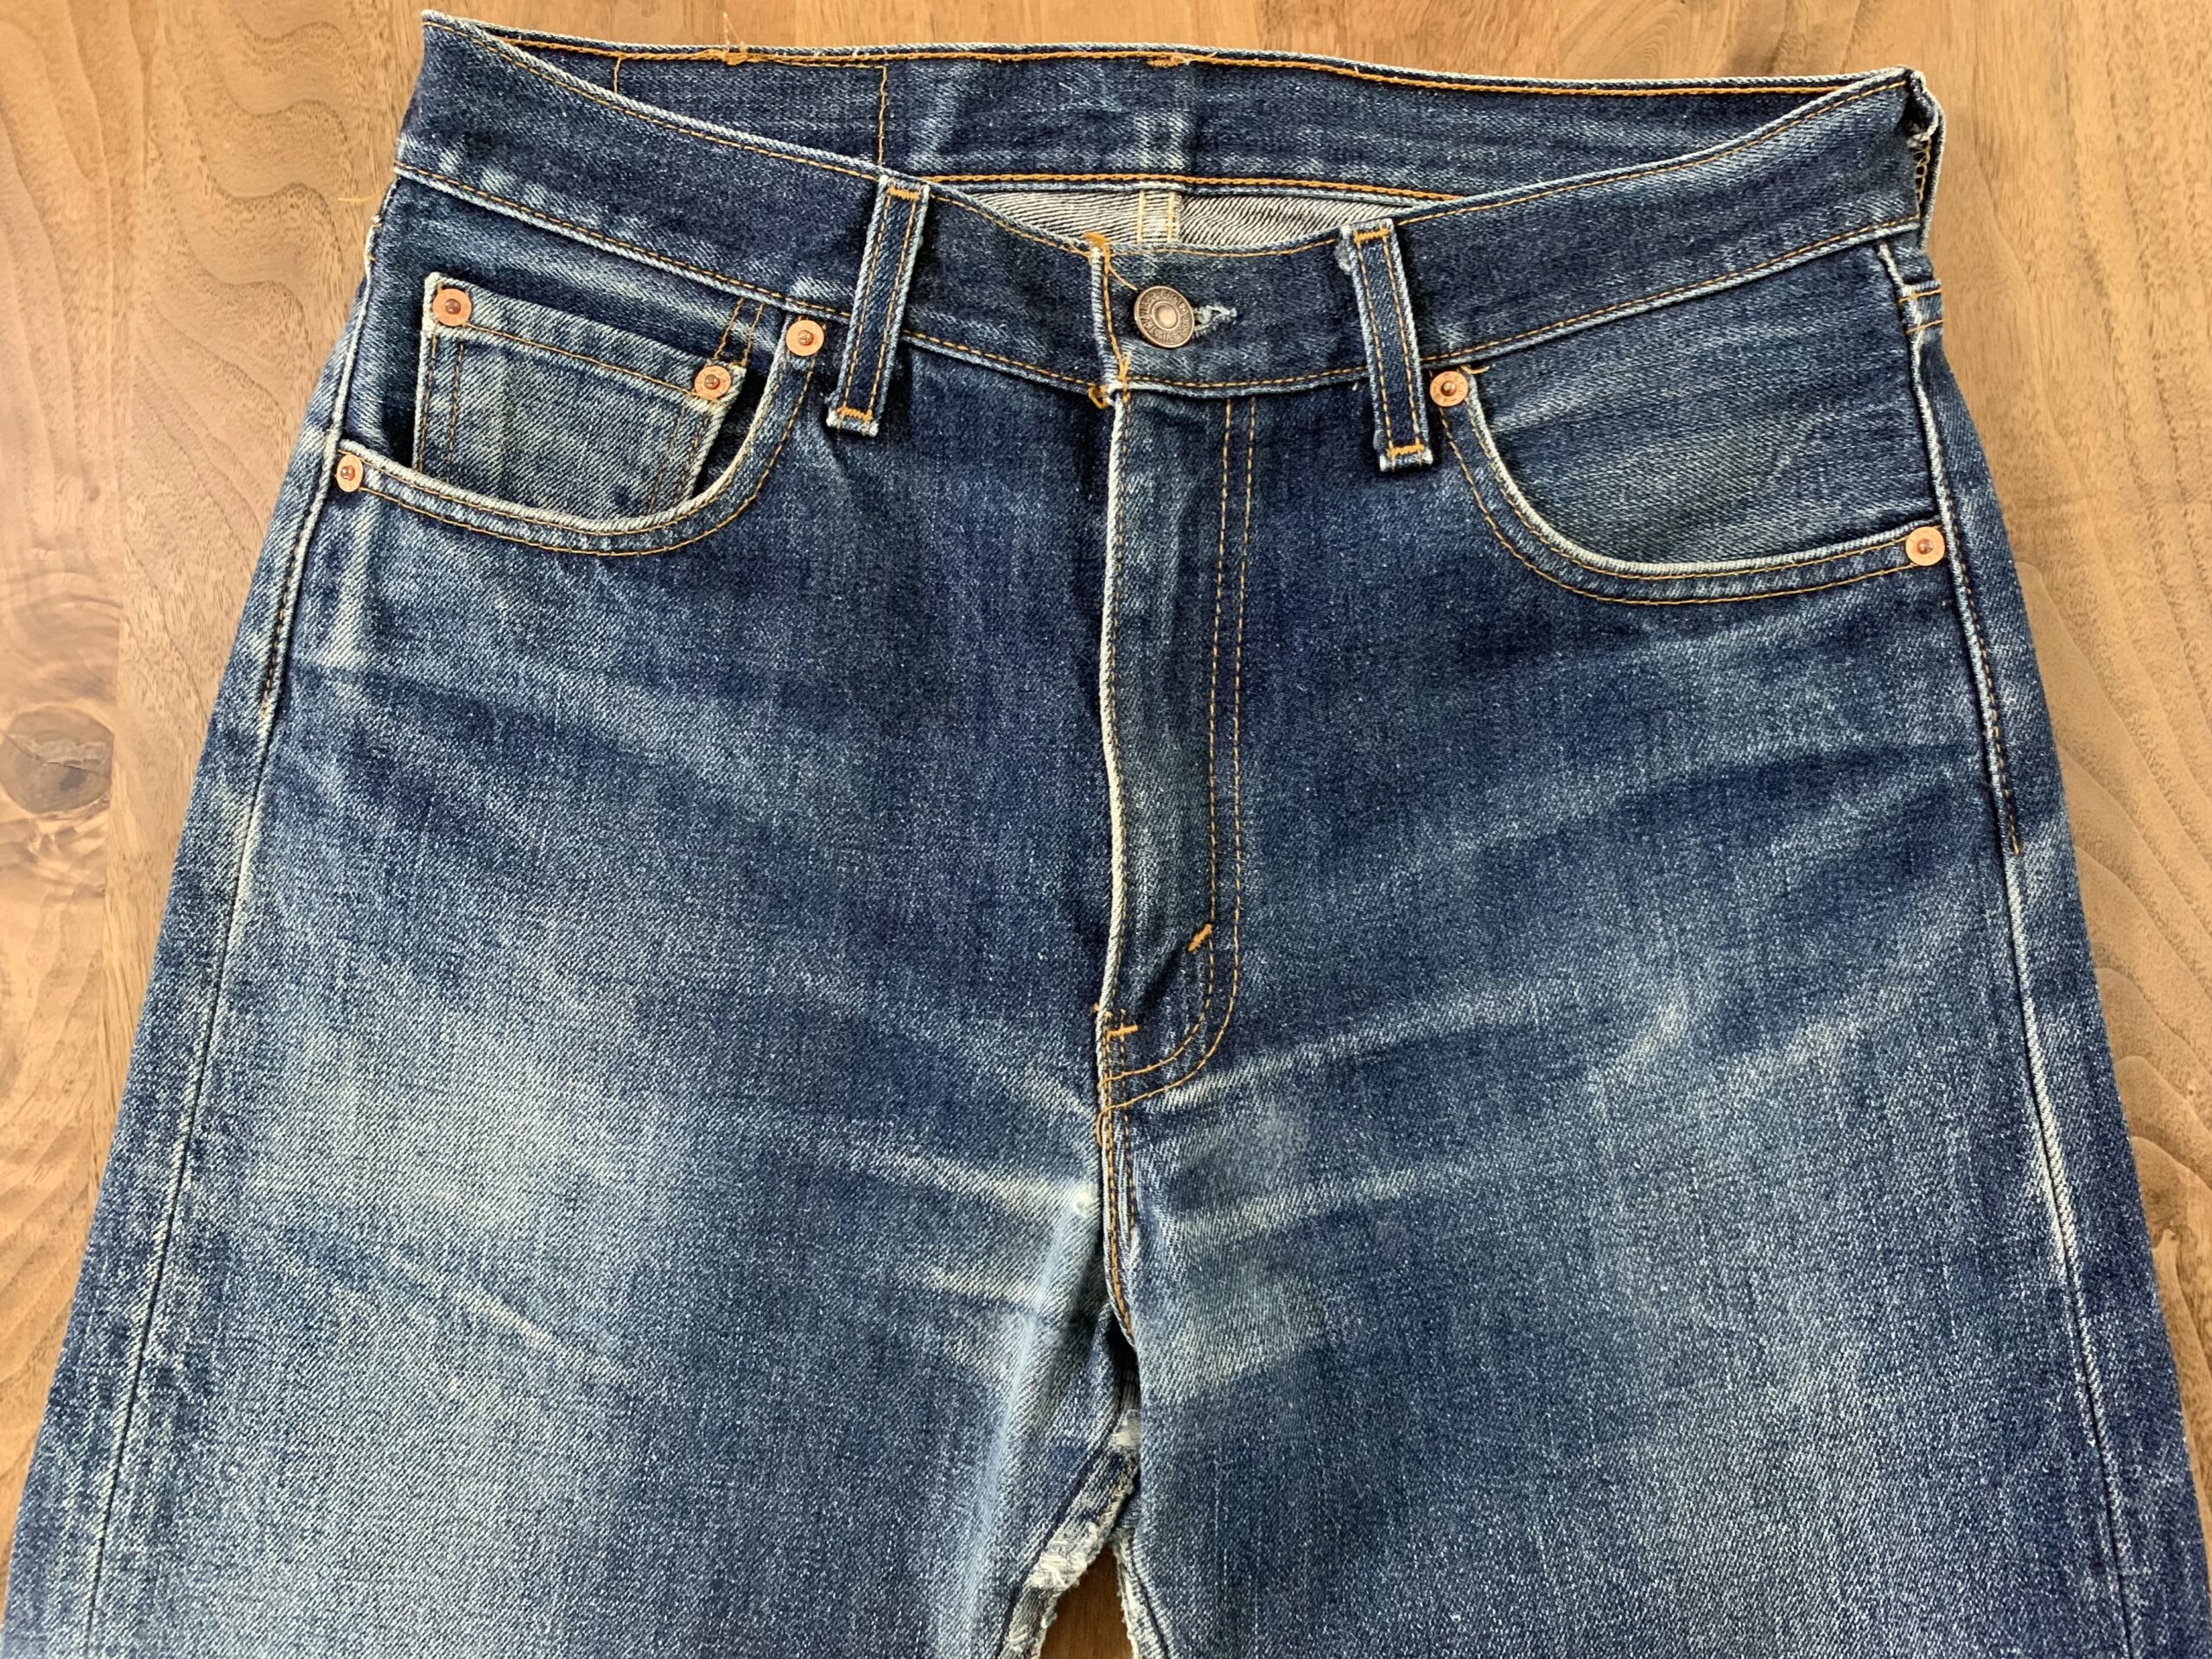 90s　levi's501 良ひげ落ちlevi's501　Made in USA色残り67割程度です